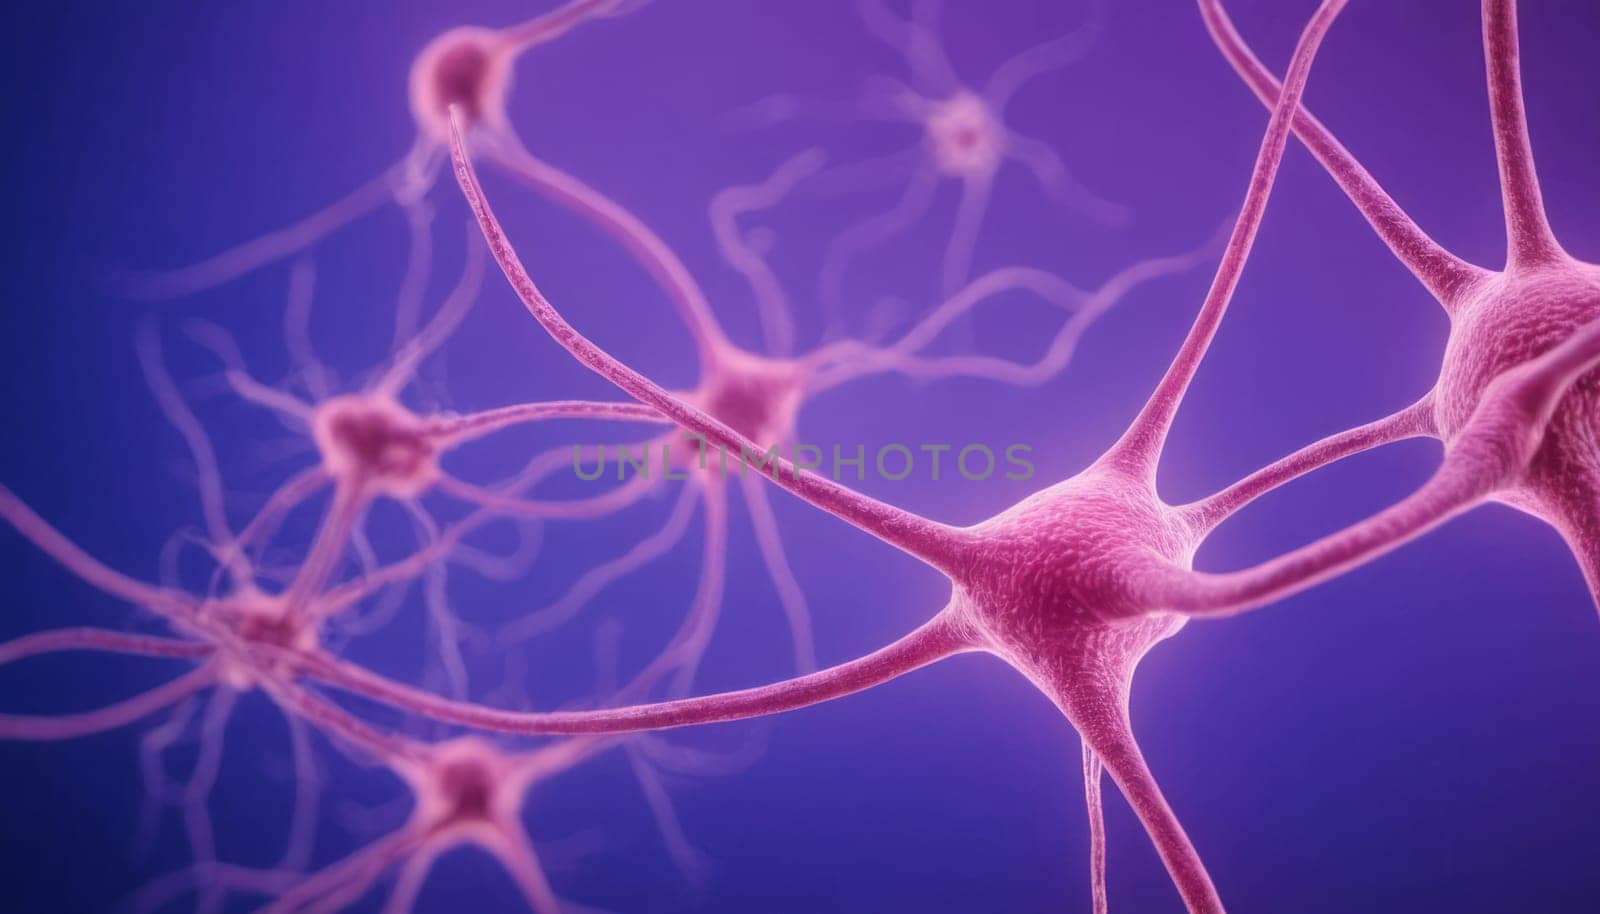 Detailed View of Neuron Cells by nkotlyar